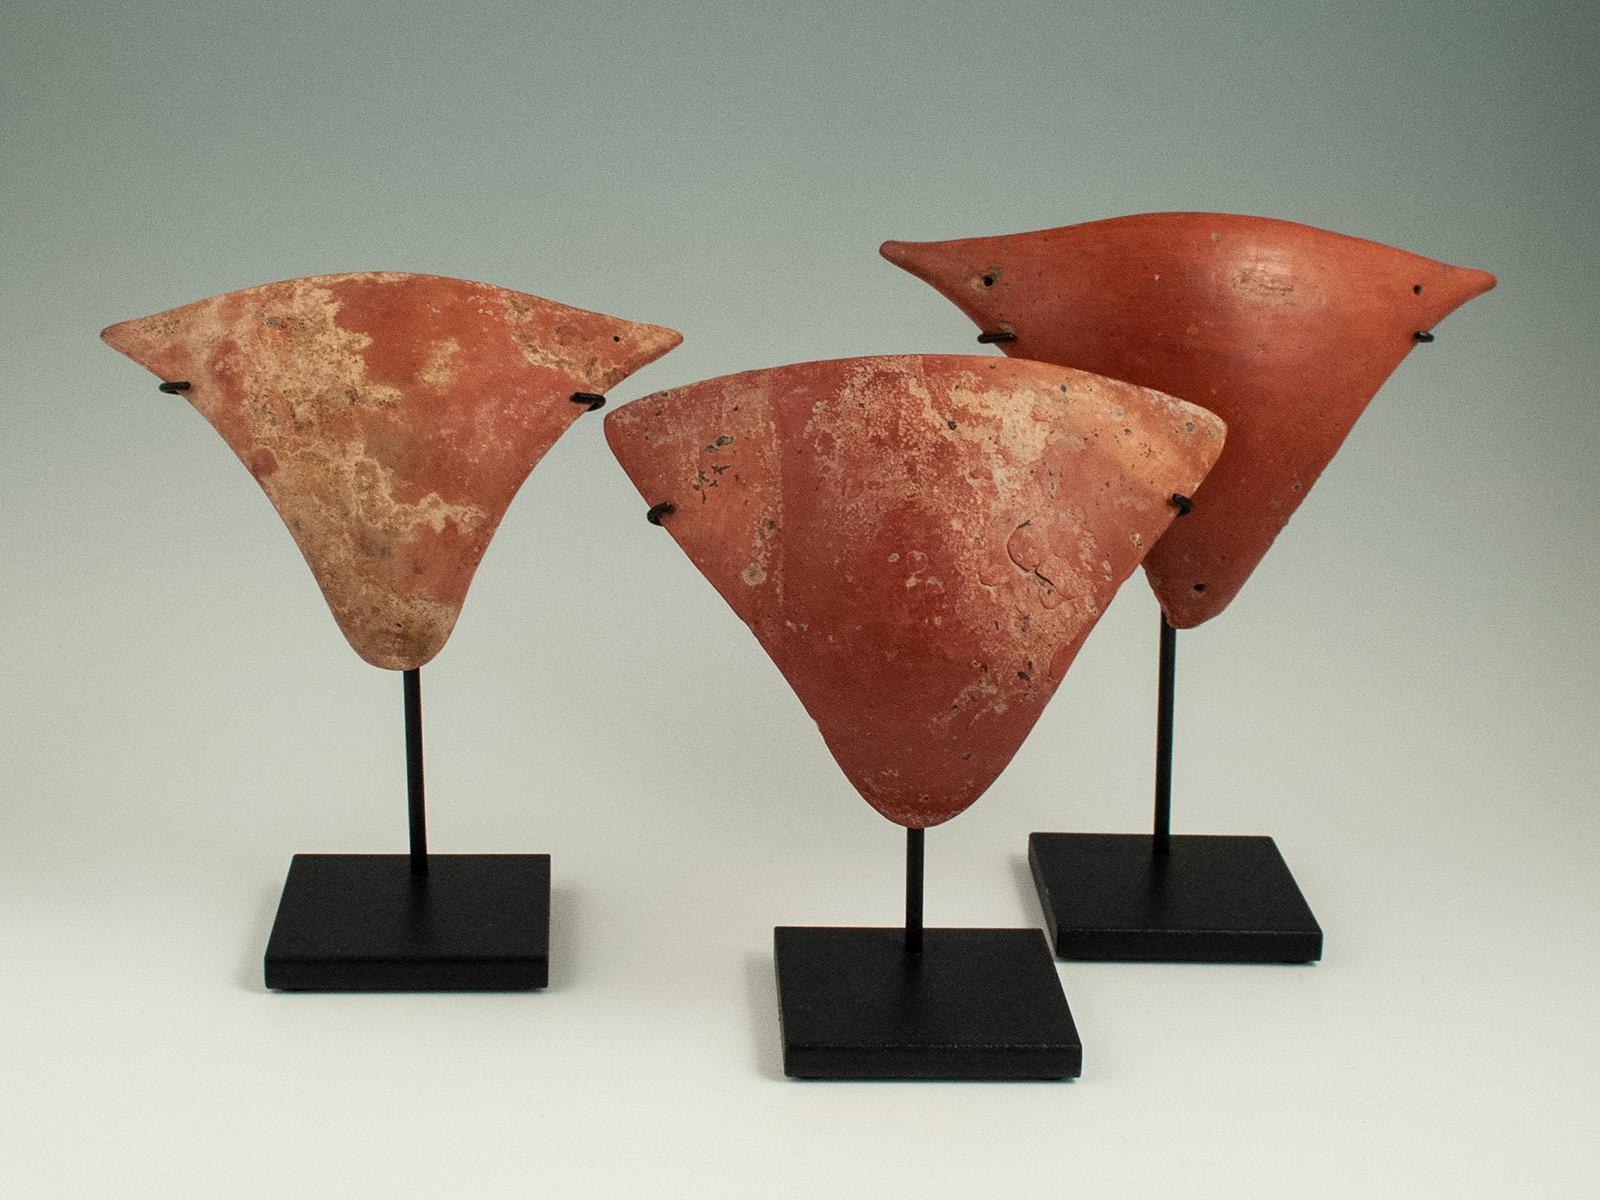 15th Century or Earlier Redware Tangas, Marajoara culture, Marajo Island, Brazil

Tangas are thin concave triangular ceramic pubic covers found in burial mounds associated with females. The holes at the corners are believed to be string holes,